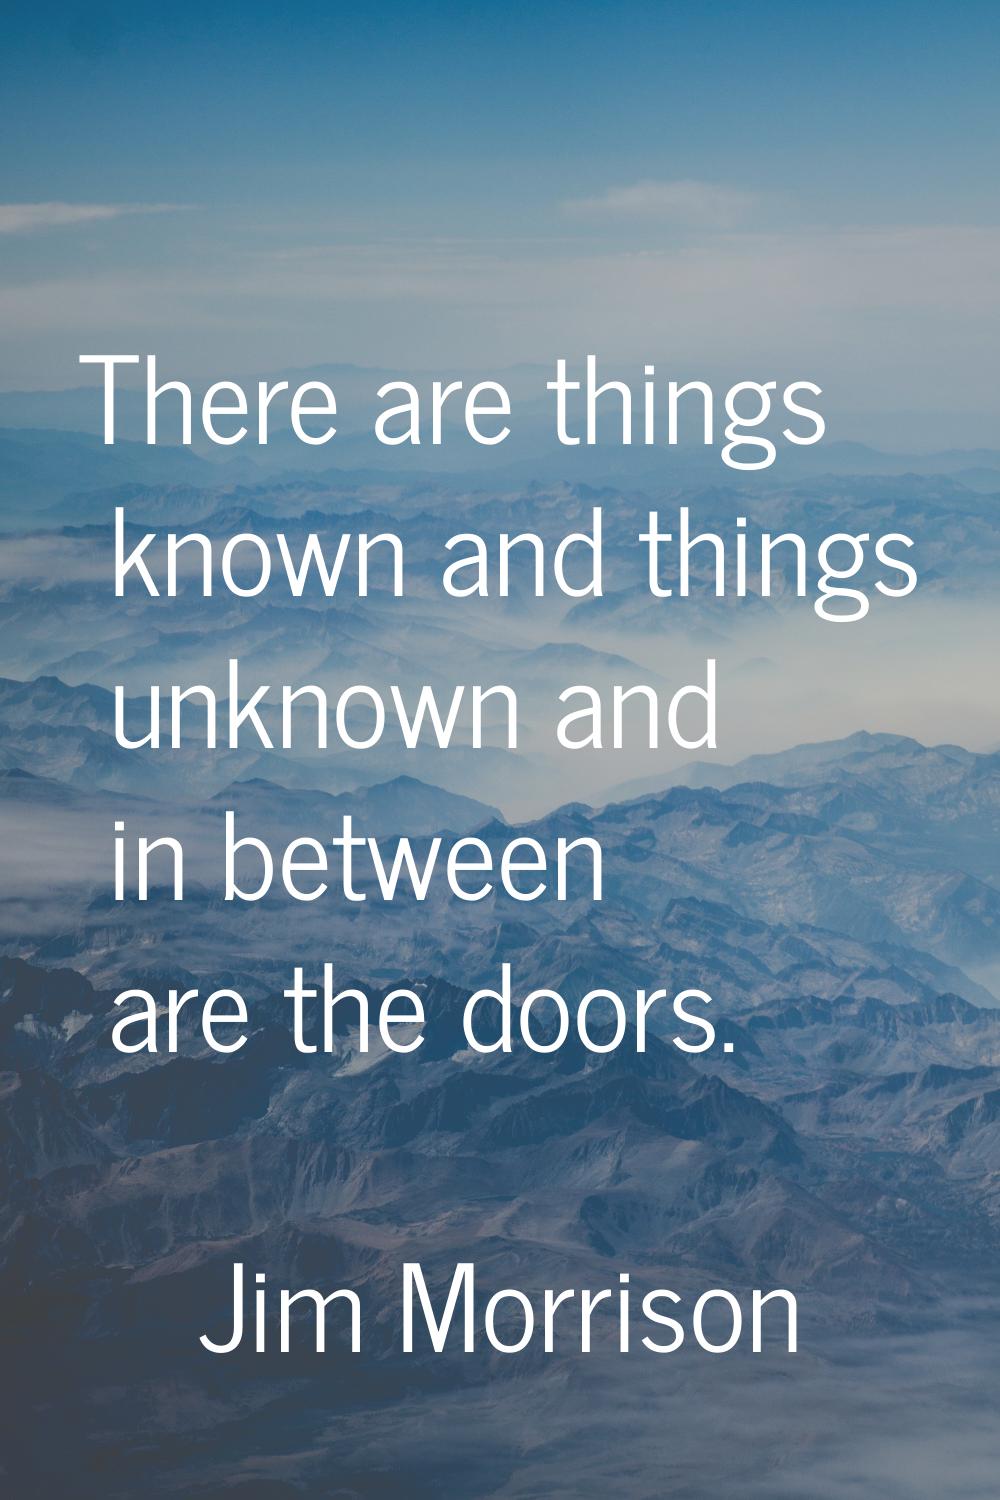 There are things known and things unknown and in between are the doors.